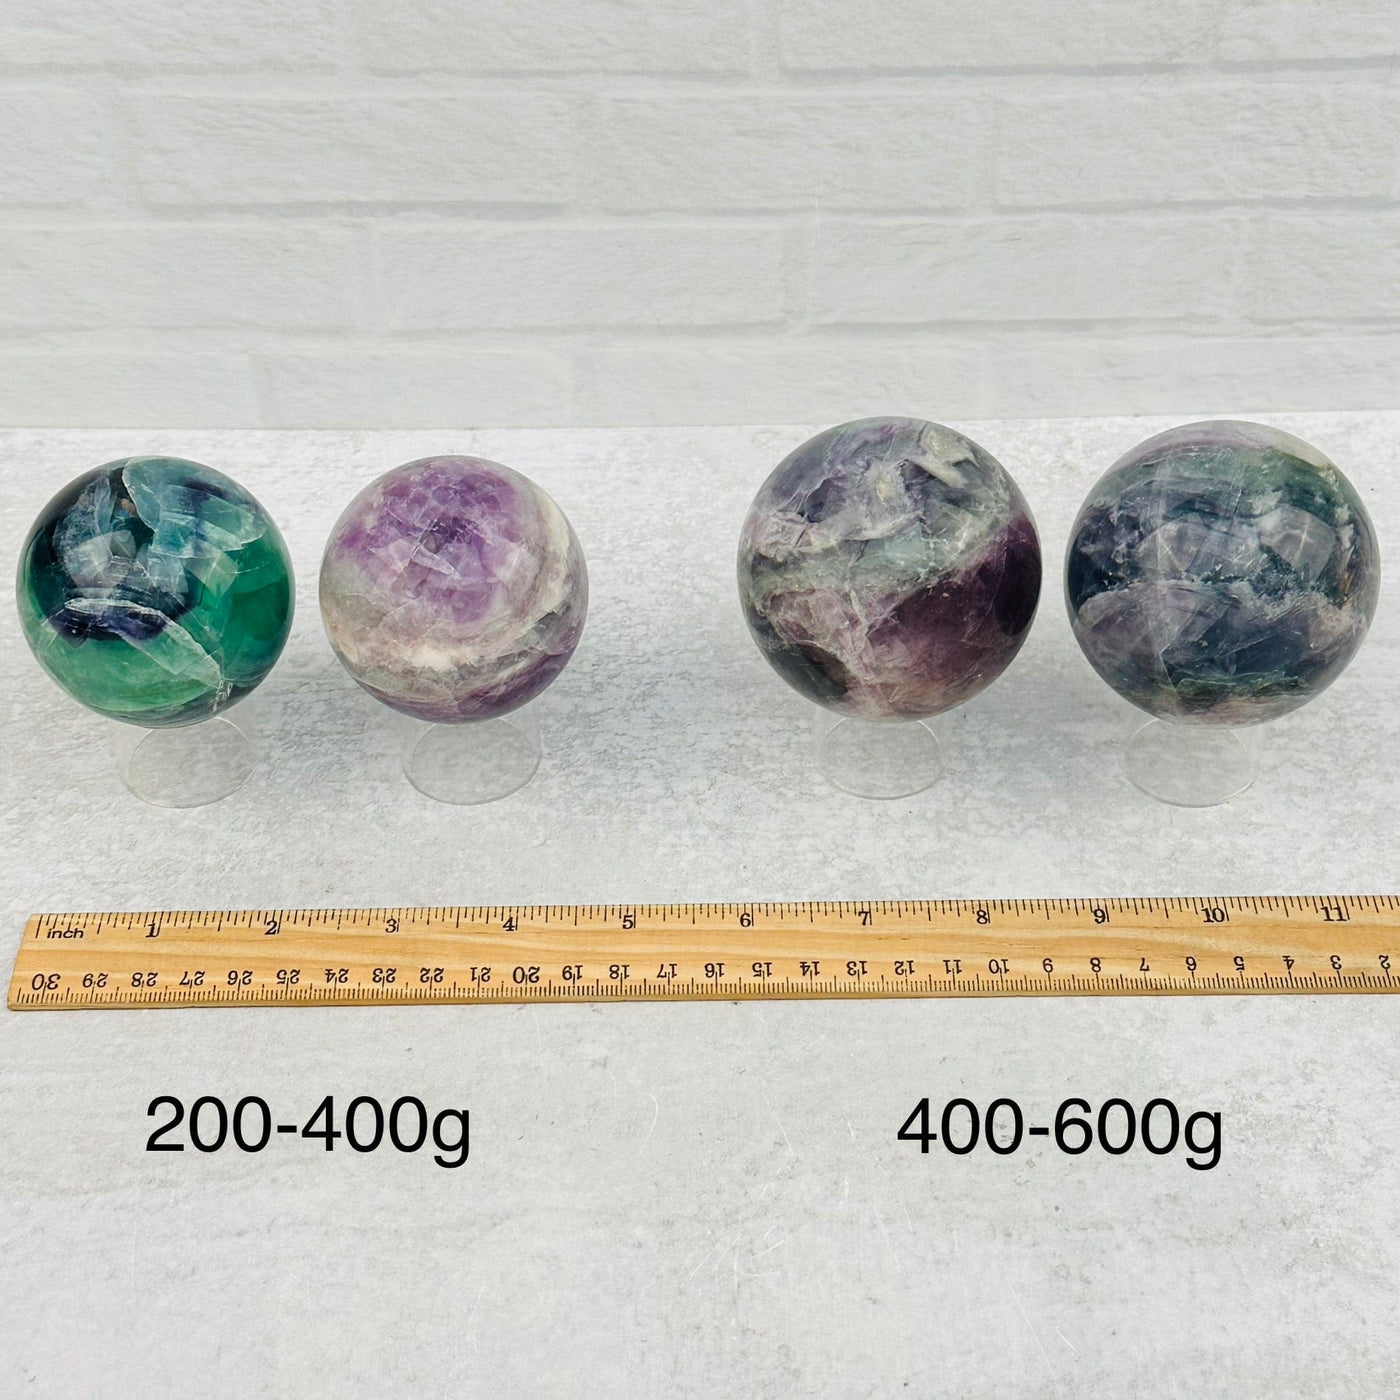 spheres displayed next to a ruler for size reference 